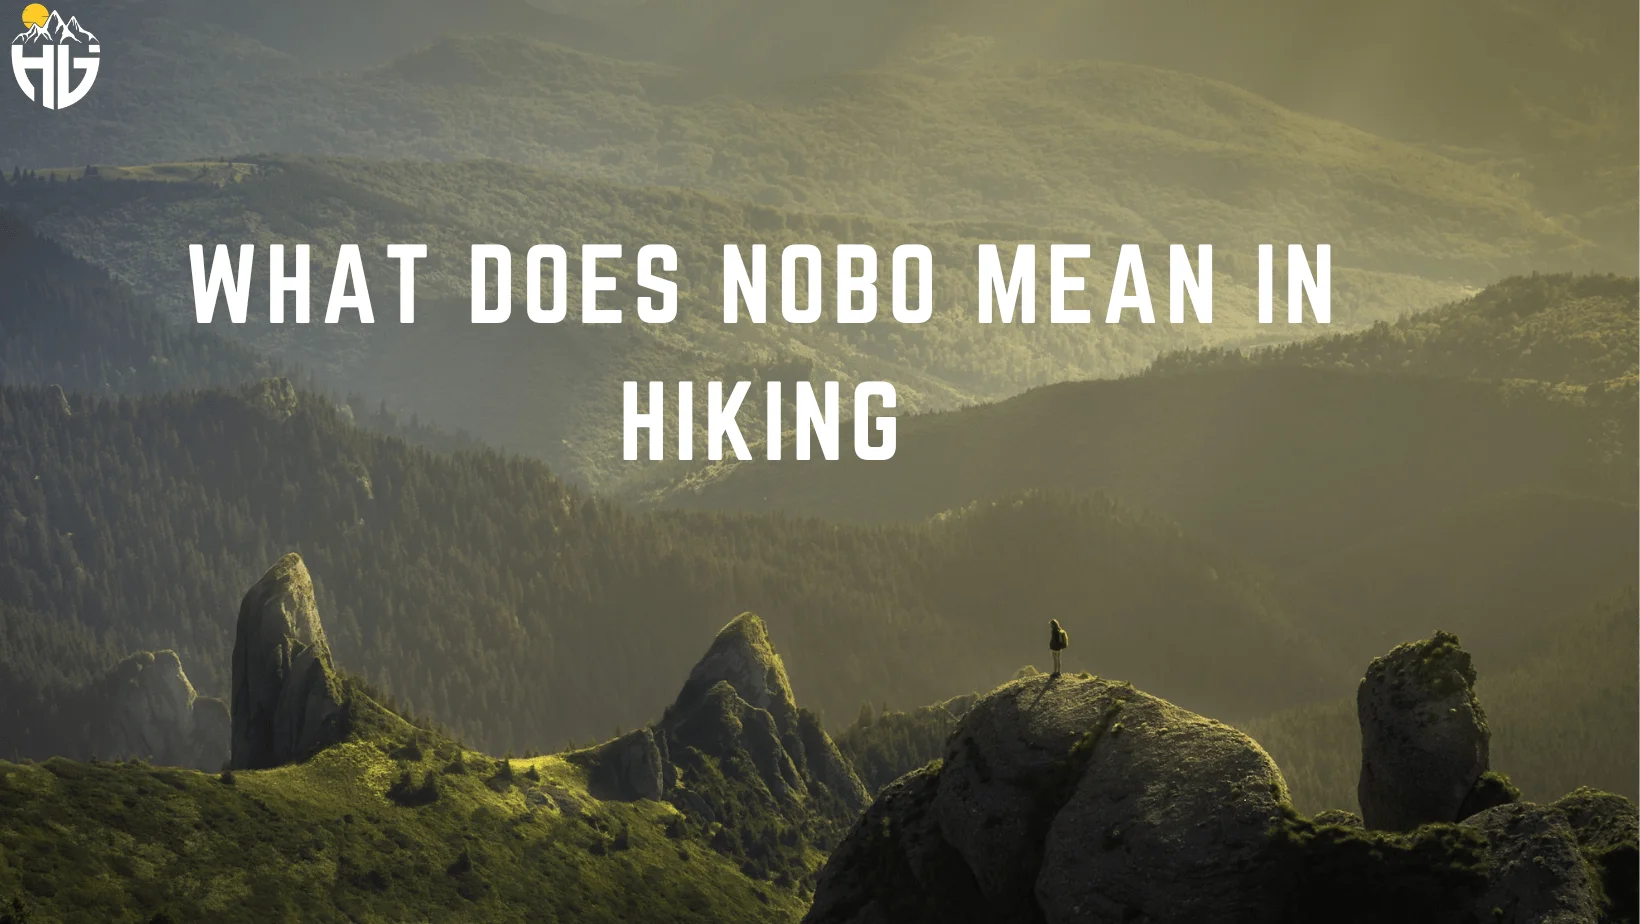 What Does NOBO Mean in Hiking